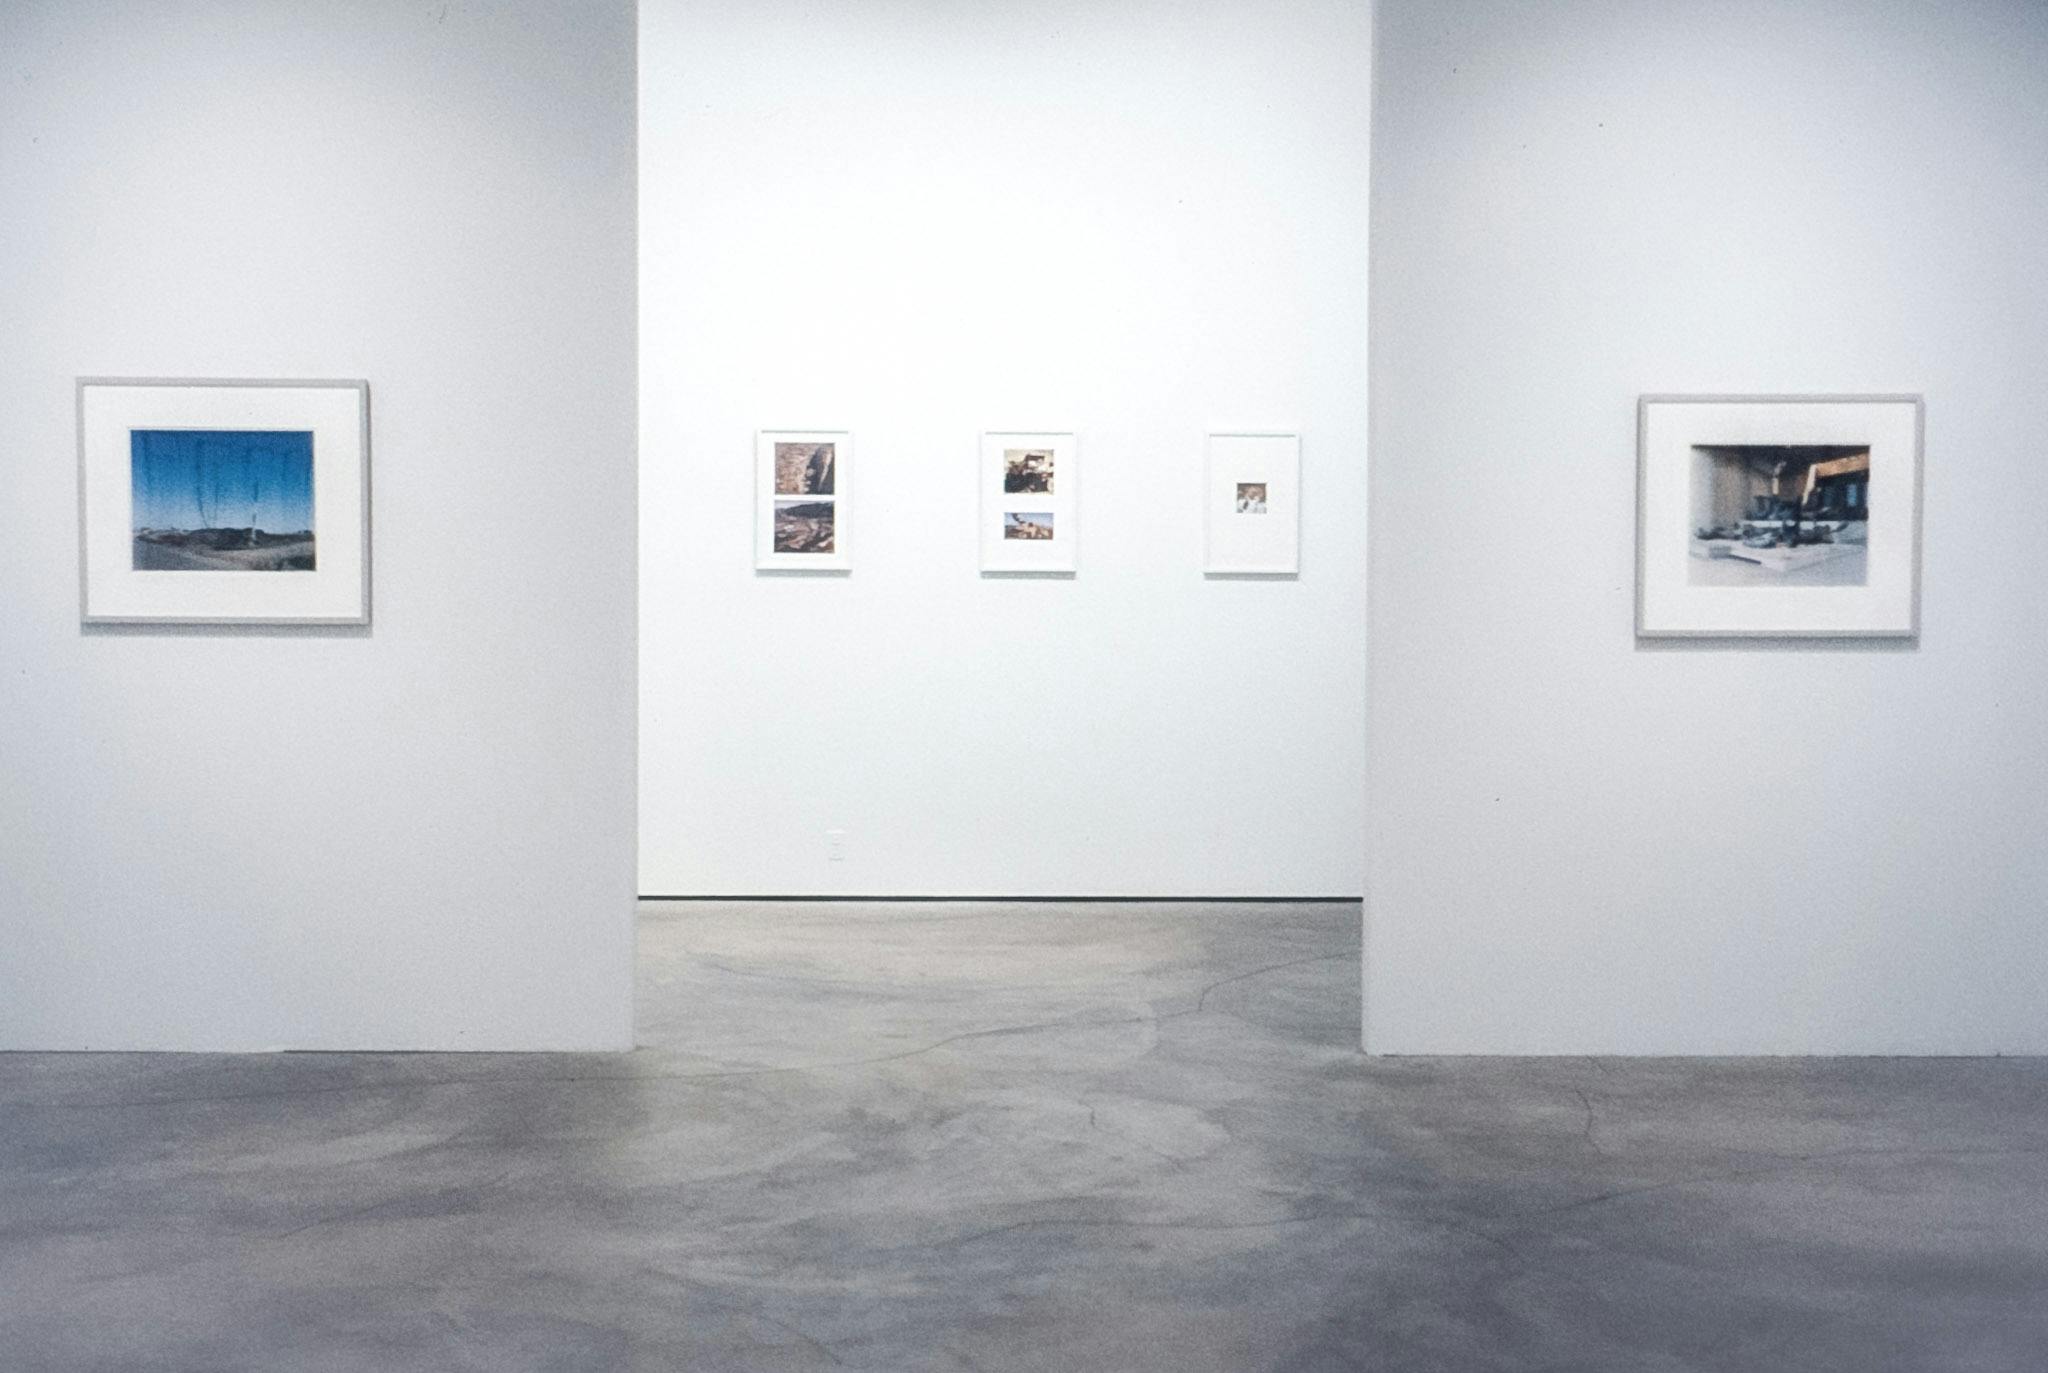 A gallery space with two walls framing a hallway in the background. The walls on the left and the right have a large framed photo work on them. In the centre, the hallway has three framed photo works.